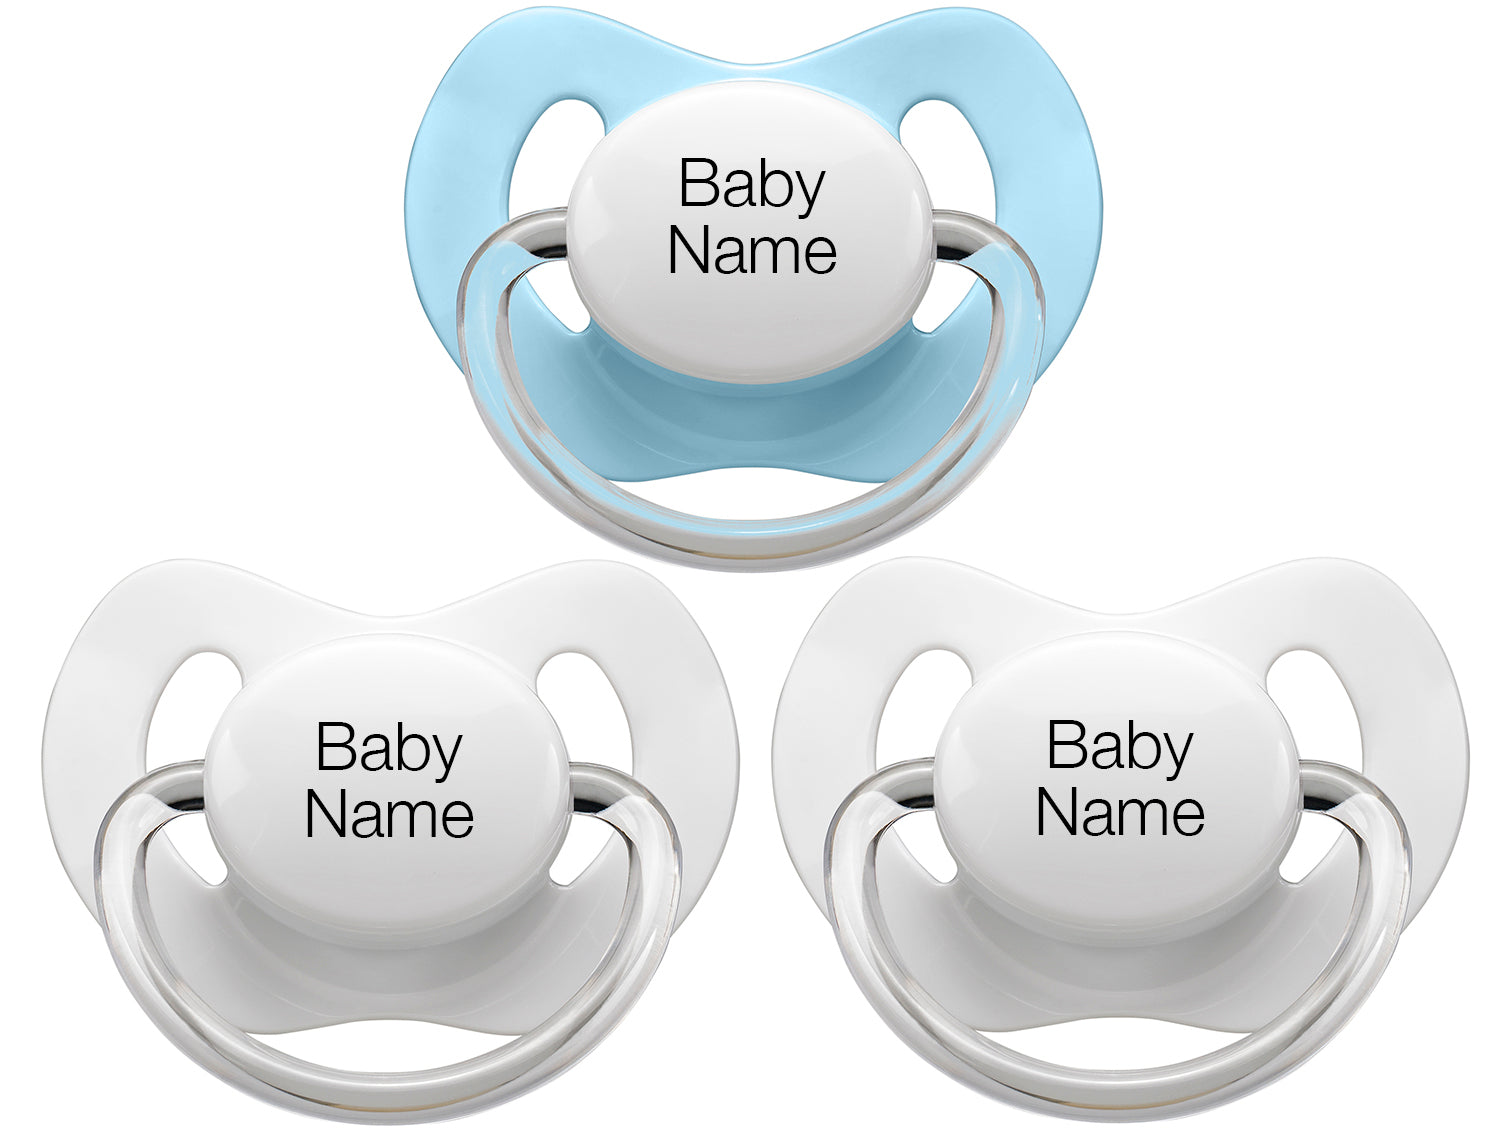 Personalised Pacifiers 3 pcs. White/Blue